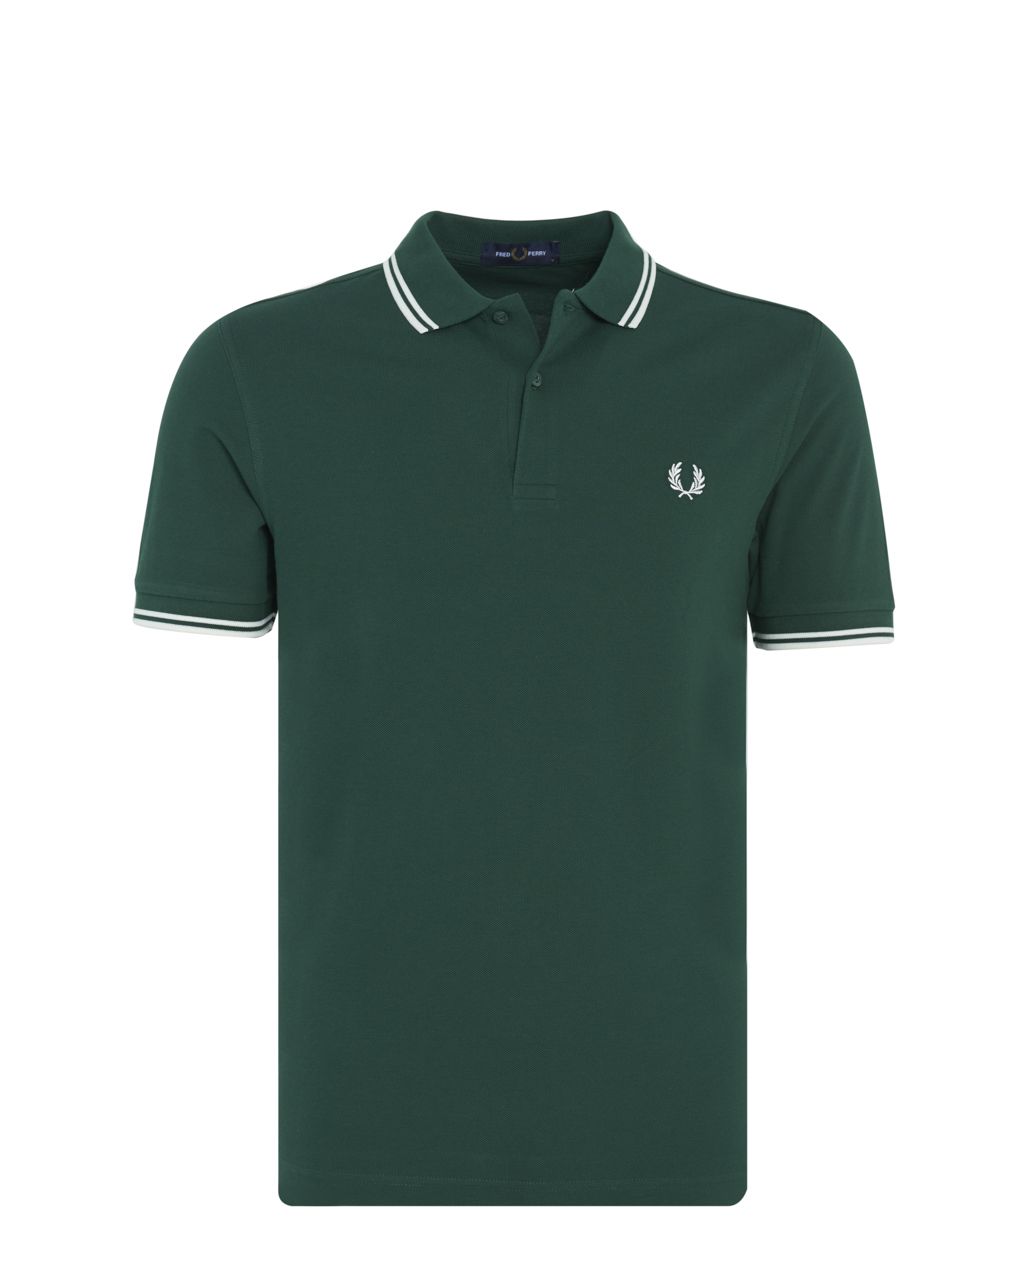 Fred Perry Polo KM Groen 070164-001-L